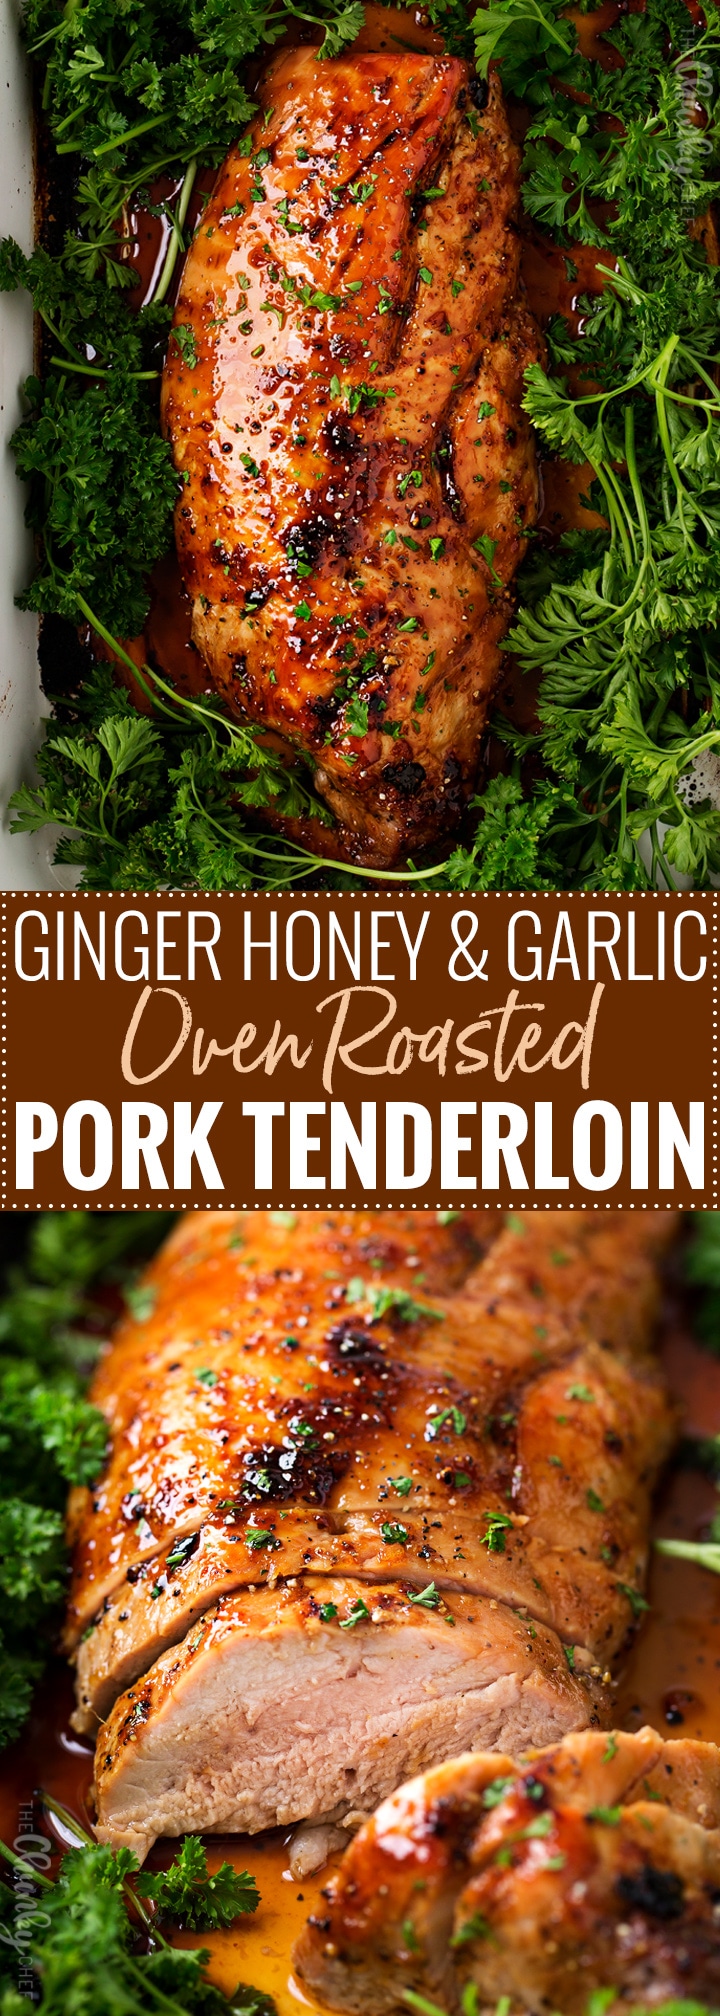 Ginger Honey Roasted Pork Tenderloin | Perfect for a busy weeknight, this pork tenderloin is loaded with amazing flavors and ready in less than 30 minutes! | https://thechunkychef.com | #dinner #pork #roasted #easyrecipe